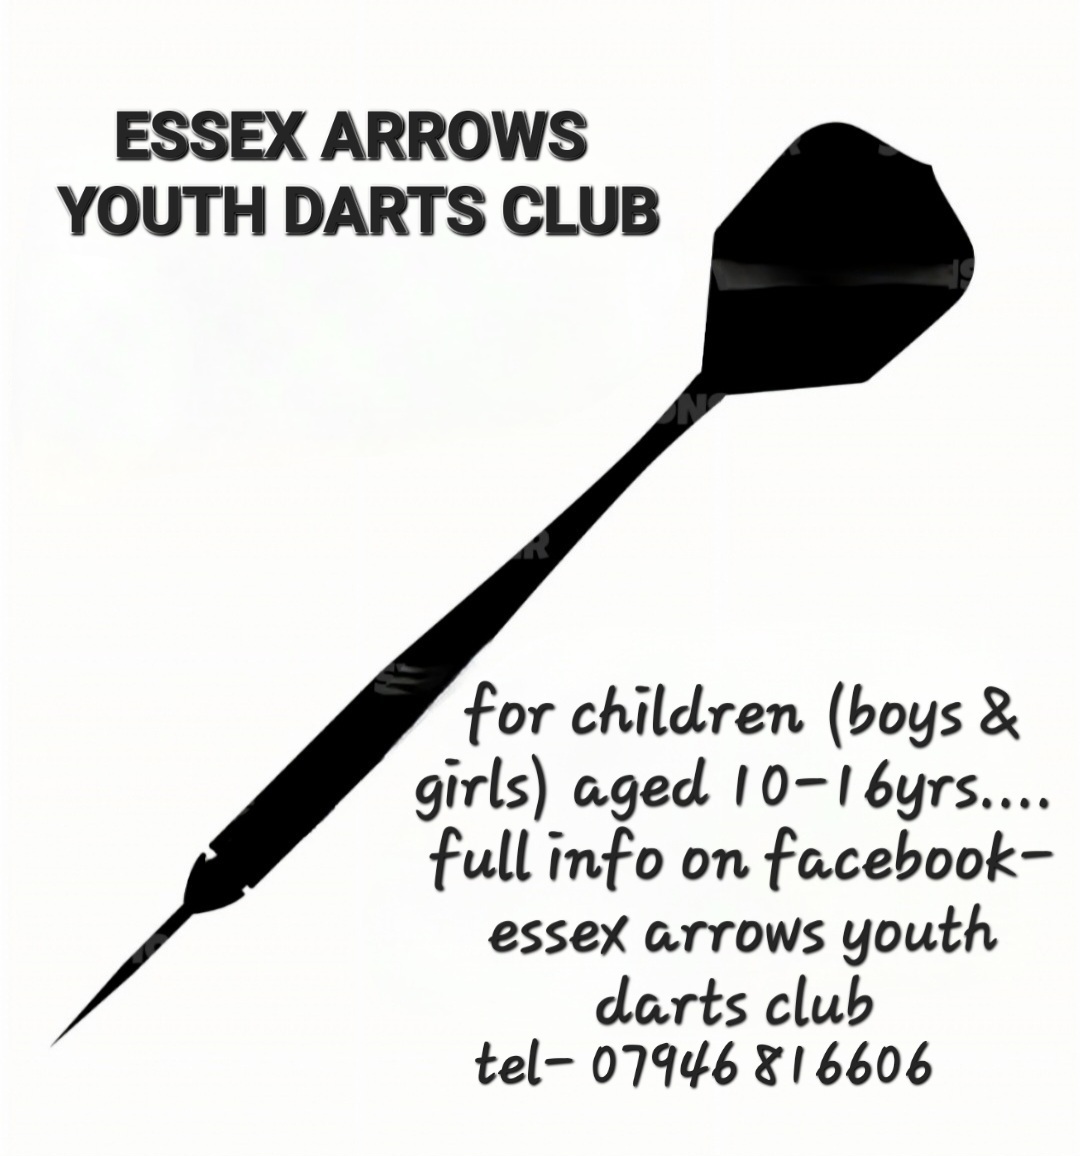 Featured image for “Essex Arrows Youth Darts Club”